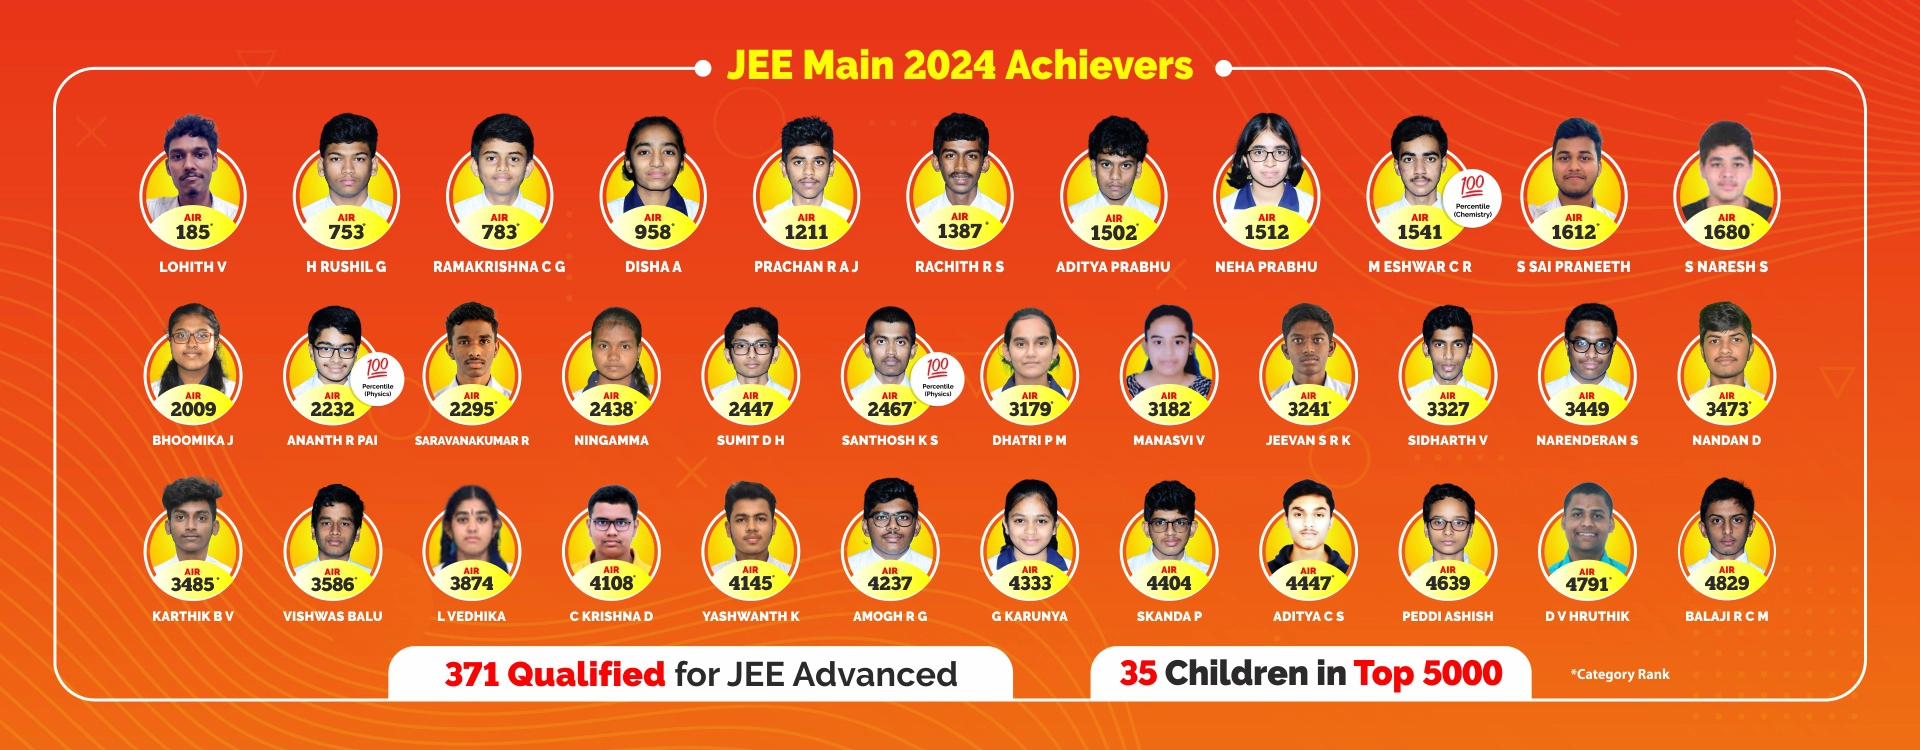 JEE-Main Results - 2024